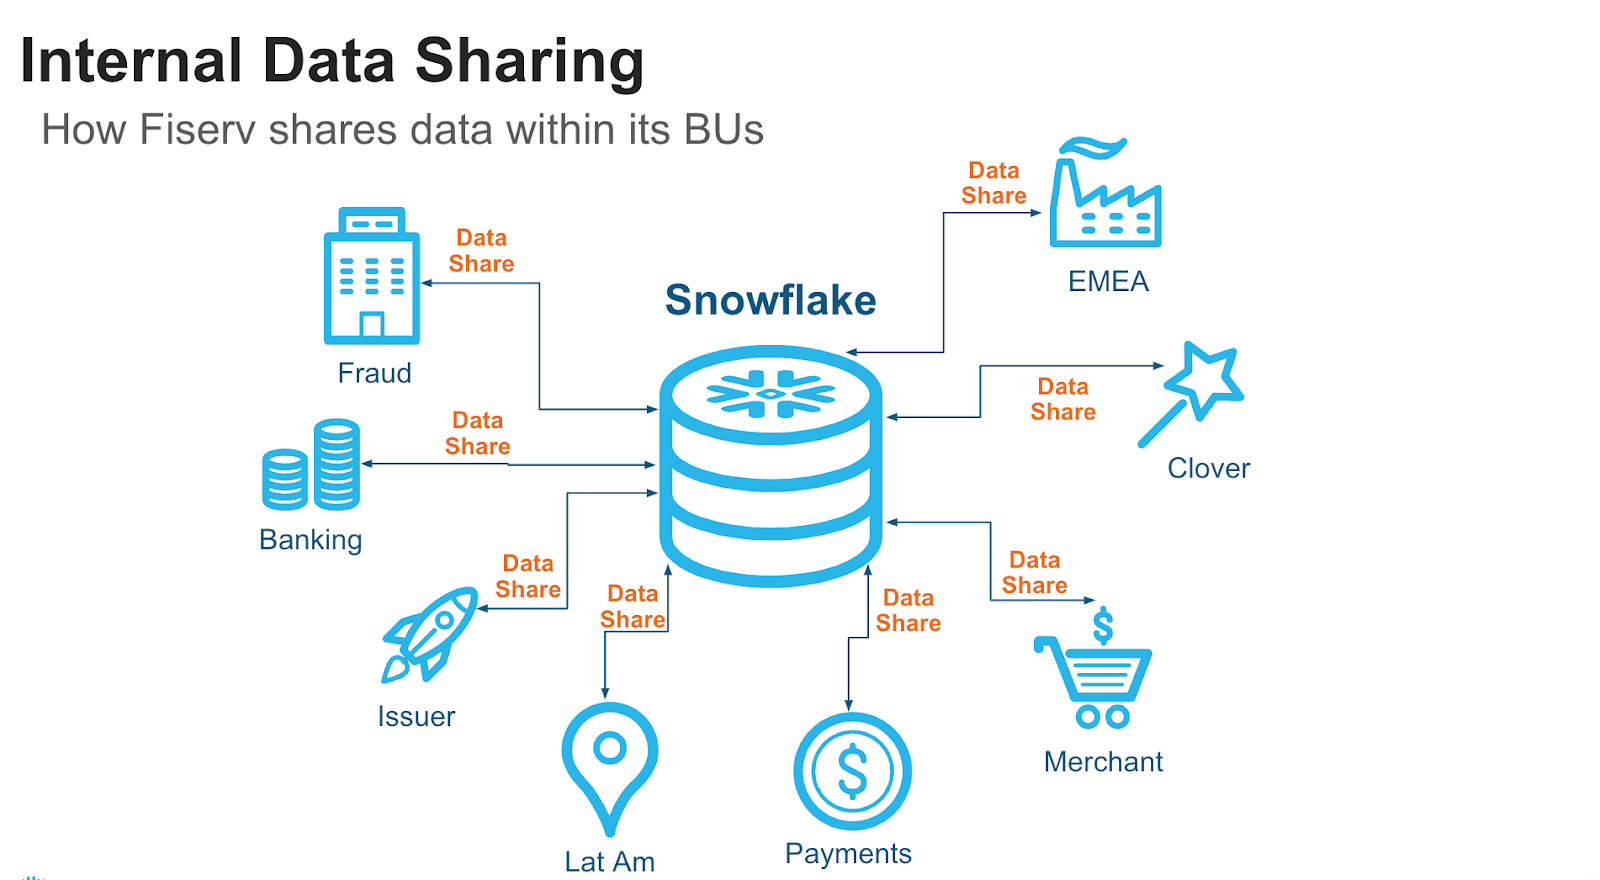 Fiserv slide showing how the organization shares data across business units